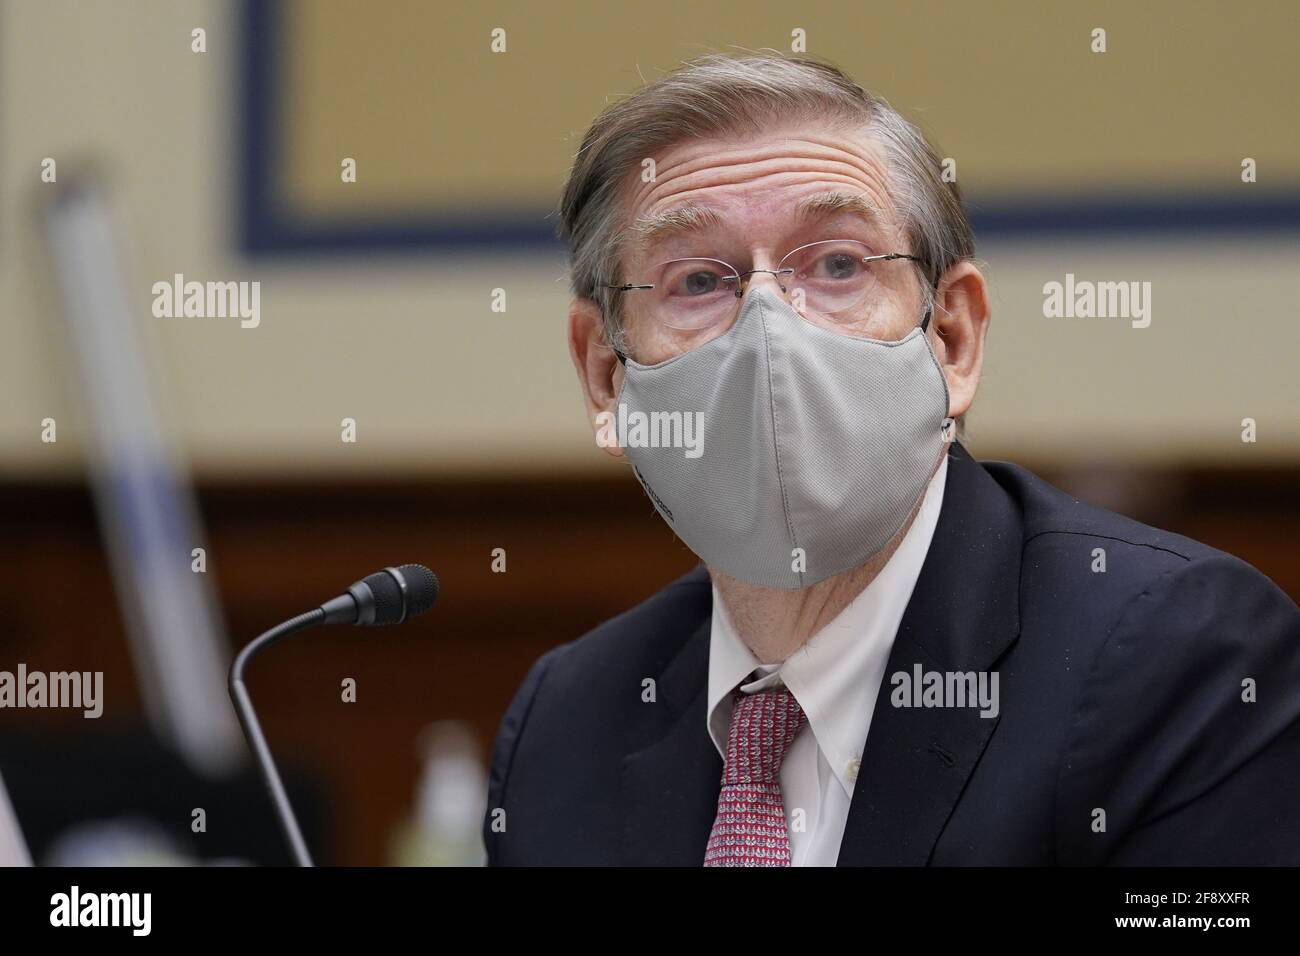 Washington, United States. 15th Apr, 2021. Chief Science Officer for COVID Response Dr. David Kessler speaks during a hearing of the House Select Subcommittee on the Coronavirus Crisis at the U.S. Capitol in Washington DC, on Thursday, April 15, 2021. Pool photo by Susan Walsh/UPI Credit: UPI/Alamy Live News Stock Photo